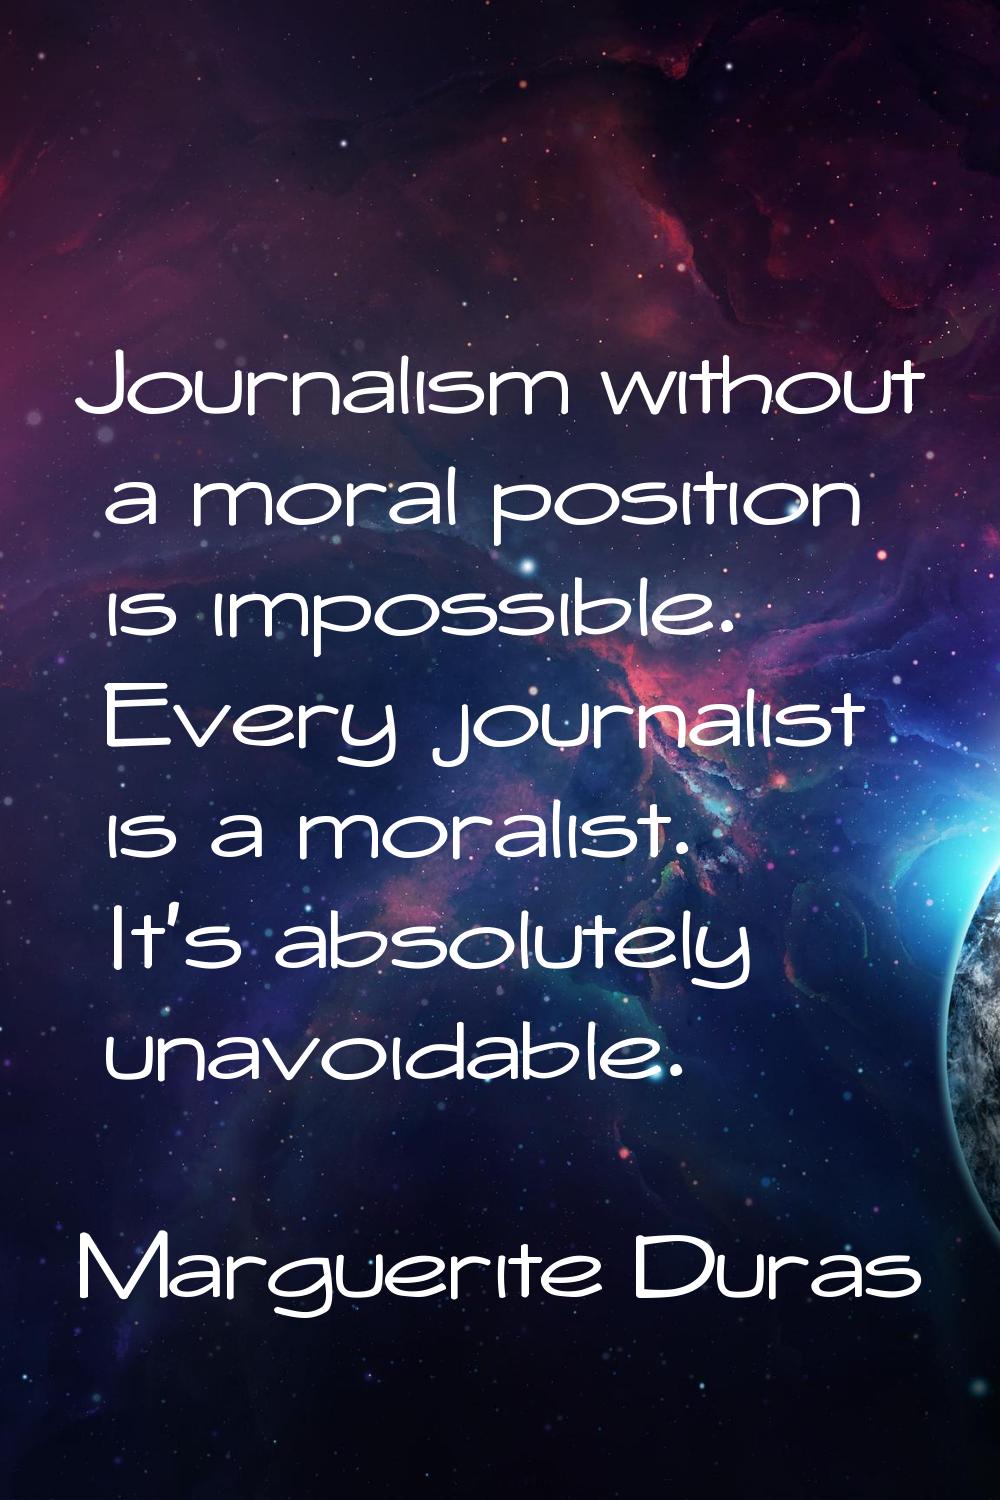 Journalism without a moral position is impossible. Every journalist is a moralist. It's absolutely 